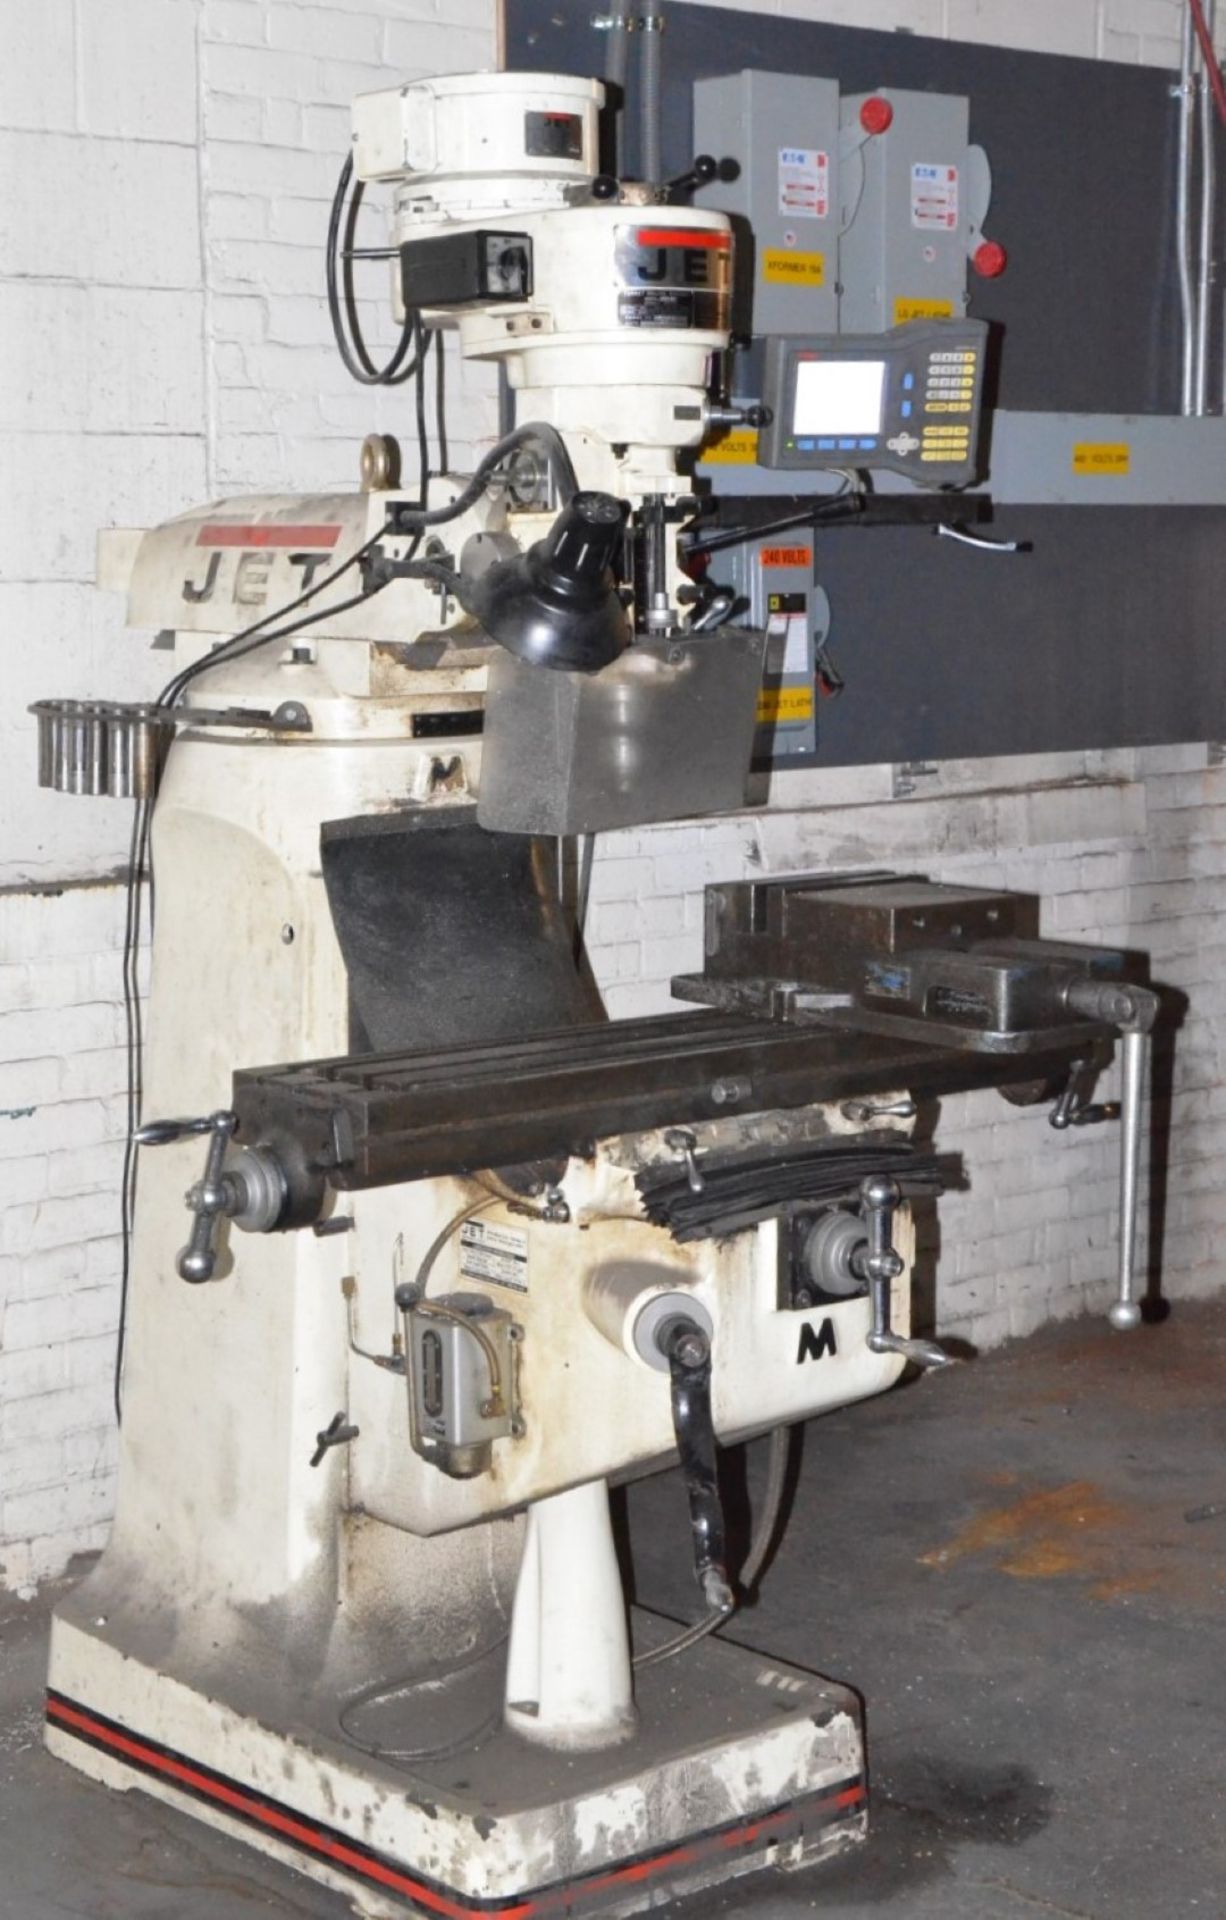 JET (2010) JTM-1 VERTICAL TURRET MILLING MACHINE WITH 9" X 42" TABLE, SPEEDS TO 2720 RPM IN 8 STEPS,